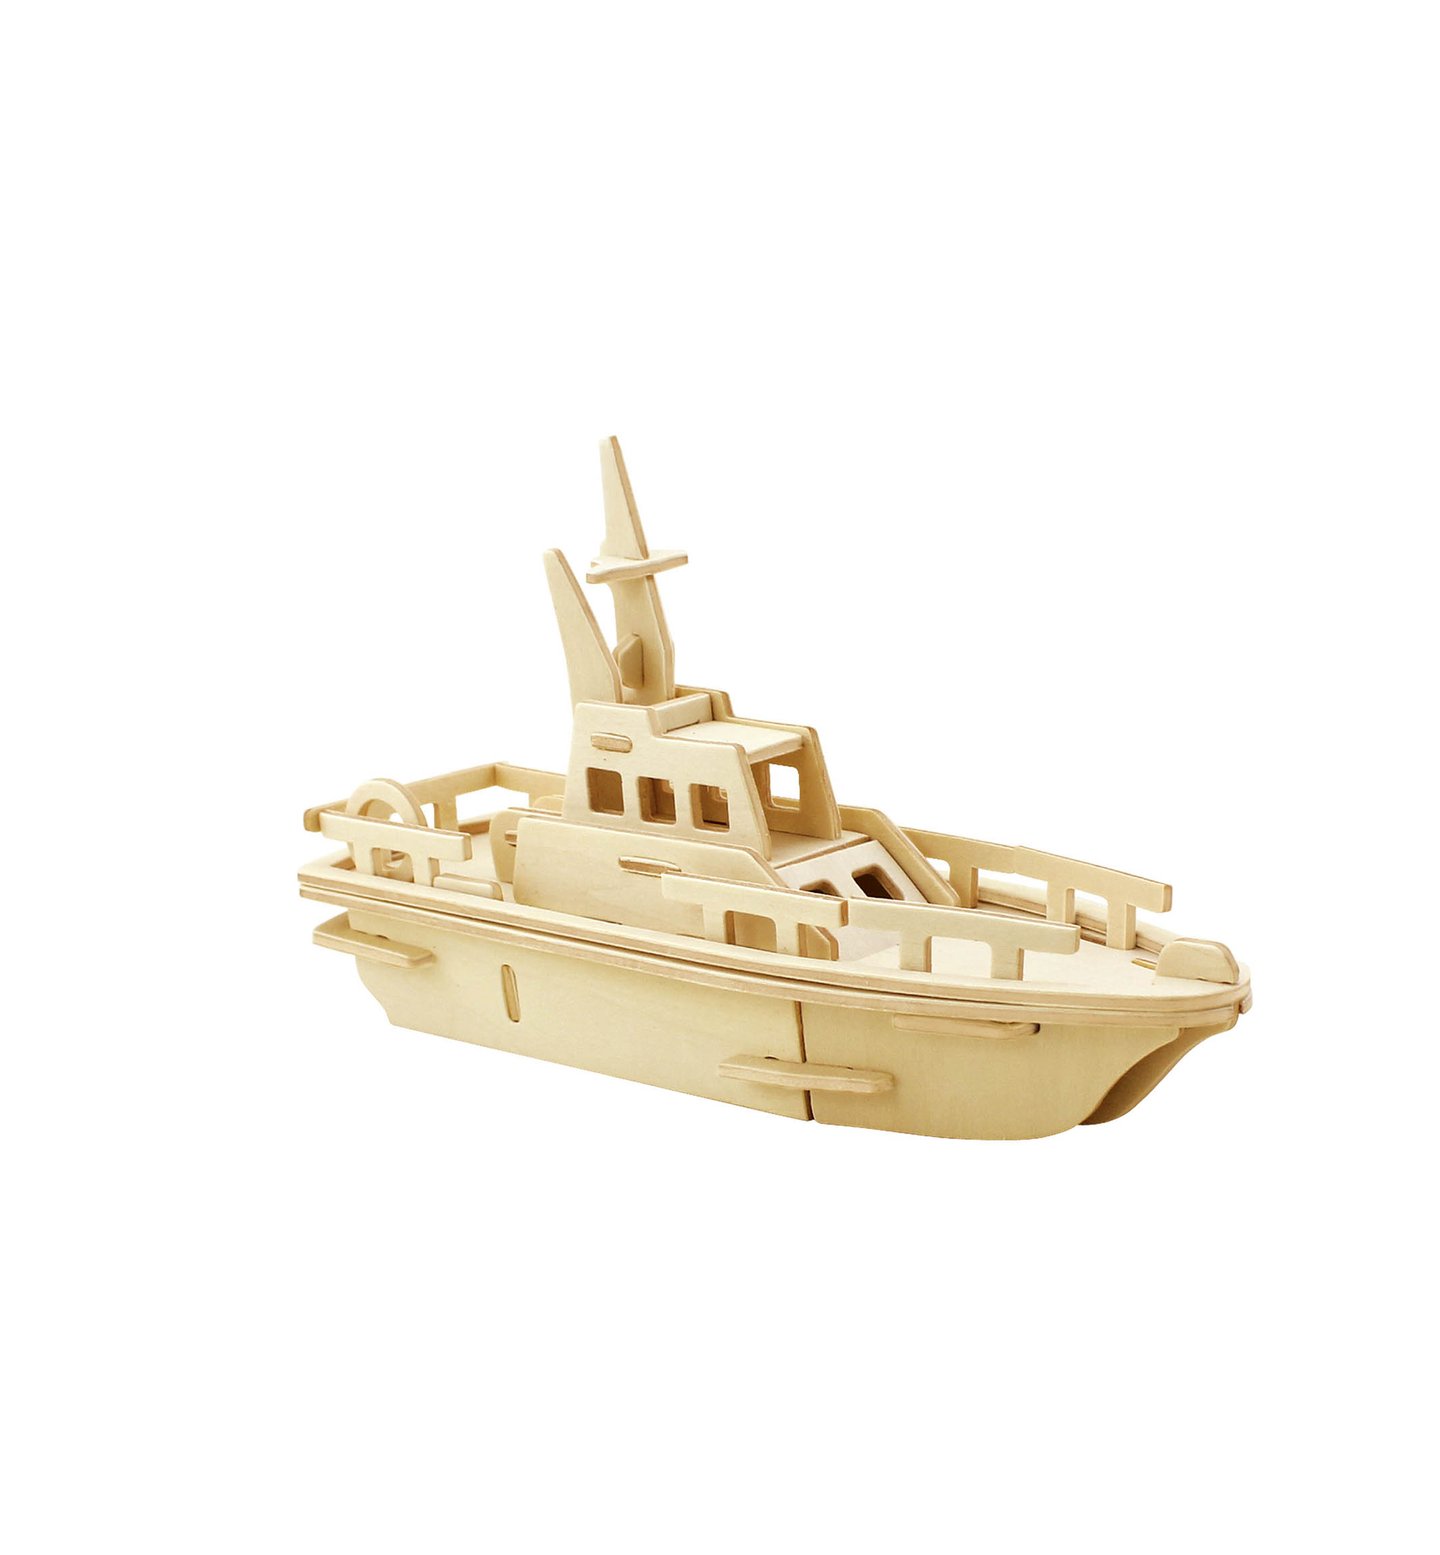 by Hands Craft 3D Wooden Puzzle Sailing Ship 